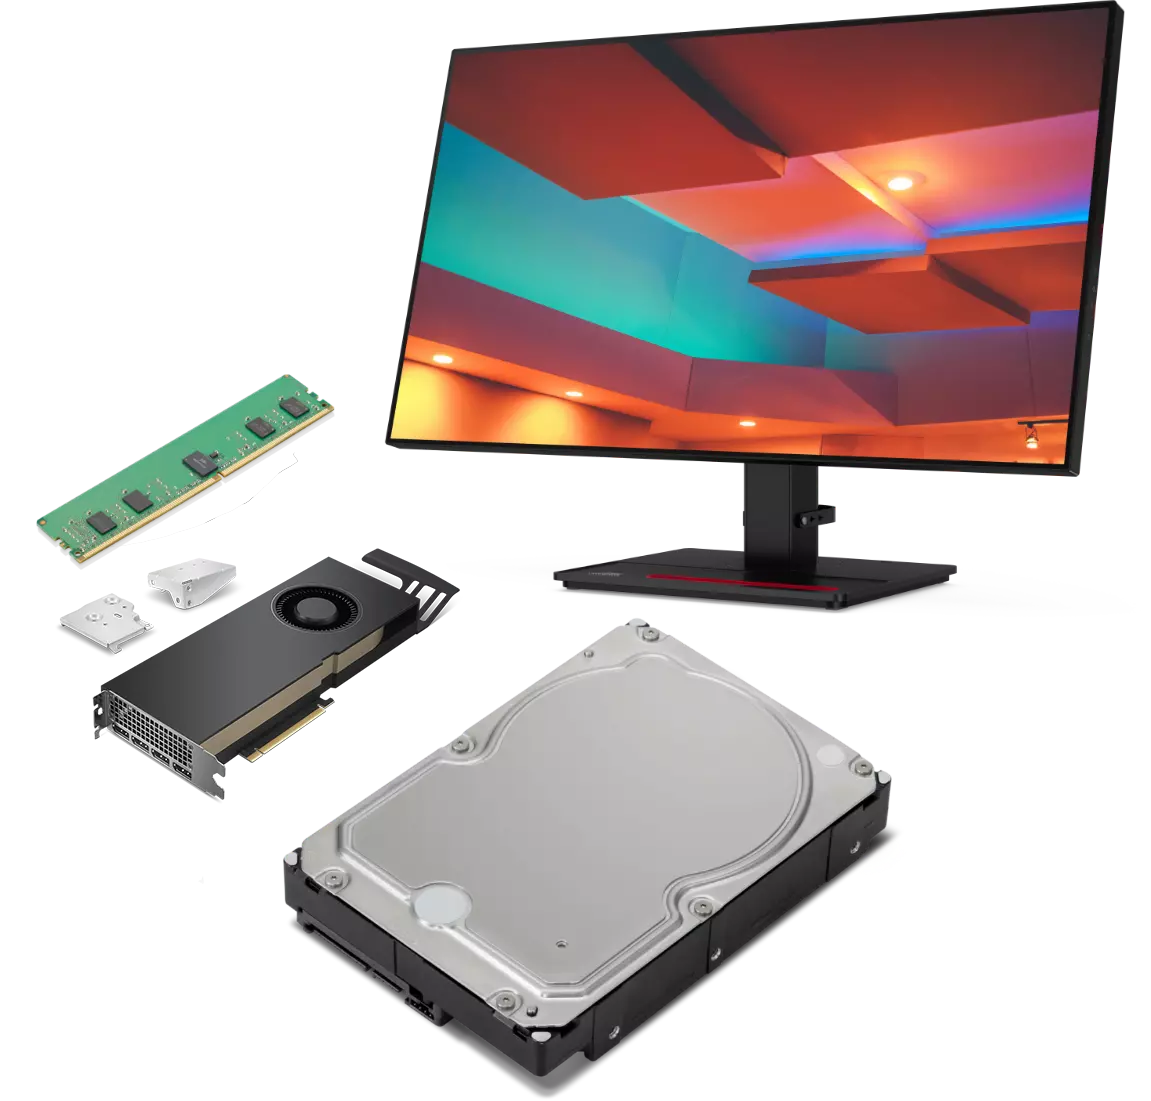 5 accessories compatible with the Lenovo ThinkStation P620 tower workstation including monitor, graphics card